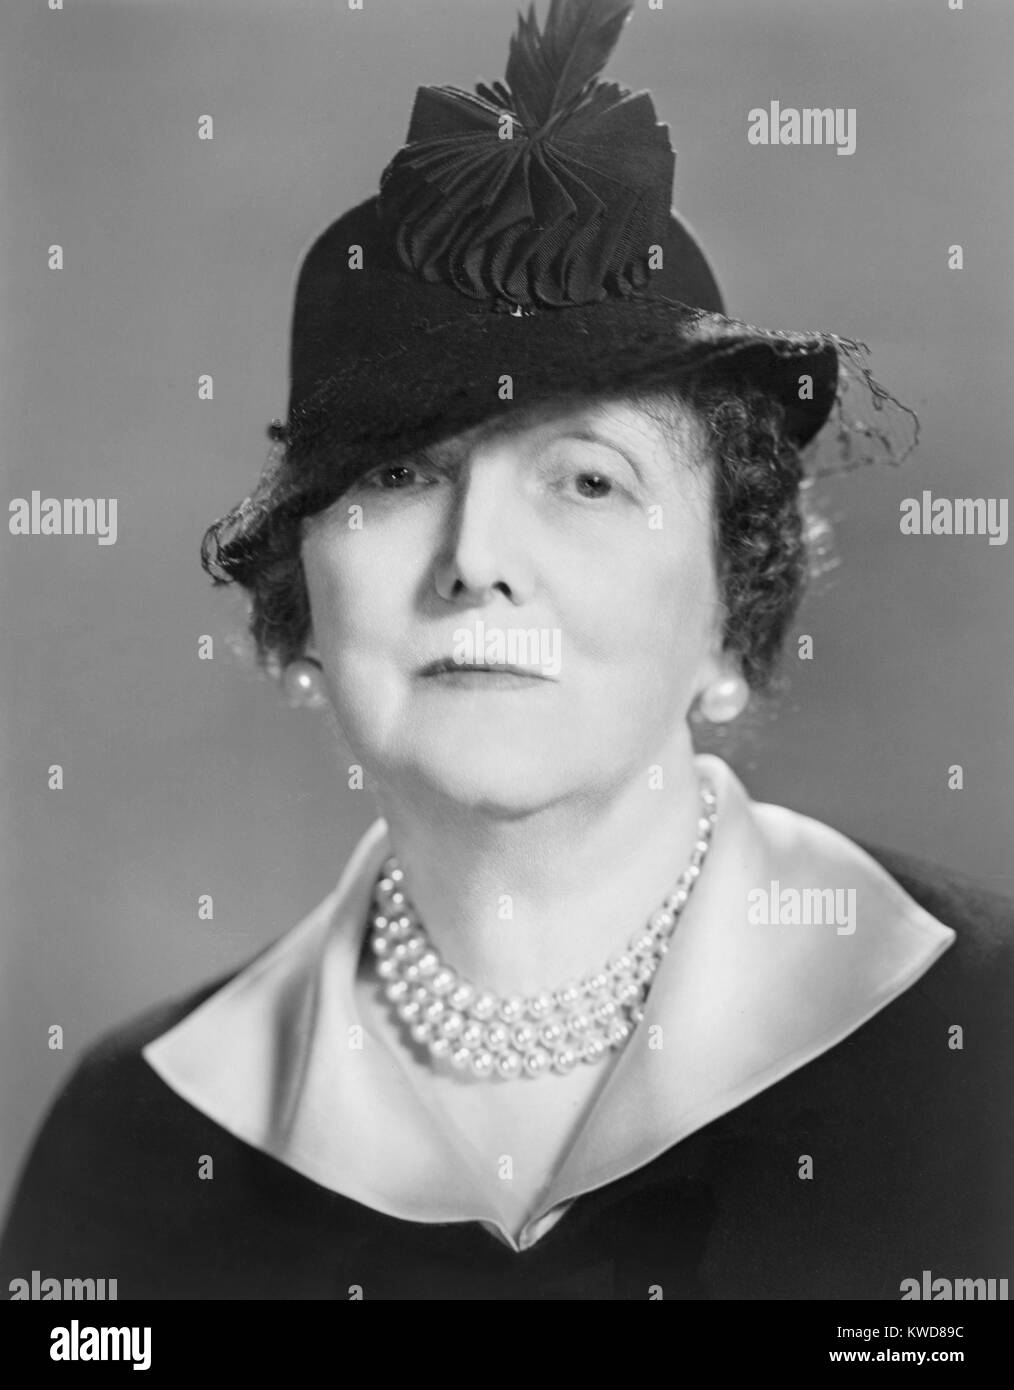 Emily Price Post, American writer and authority on etiquette, in 1937 portrait. In the 1930s she spoke on radio programs and wrote a column on good taste for the Bell Syndicate. (BSLOC 2015 17 181) Stock Photo